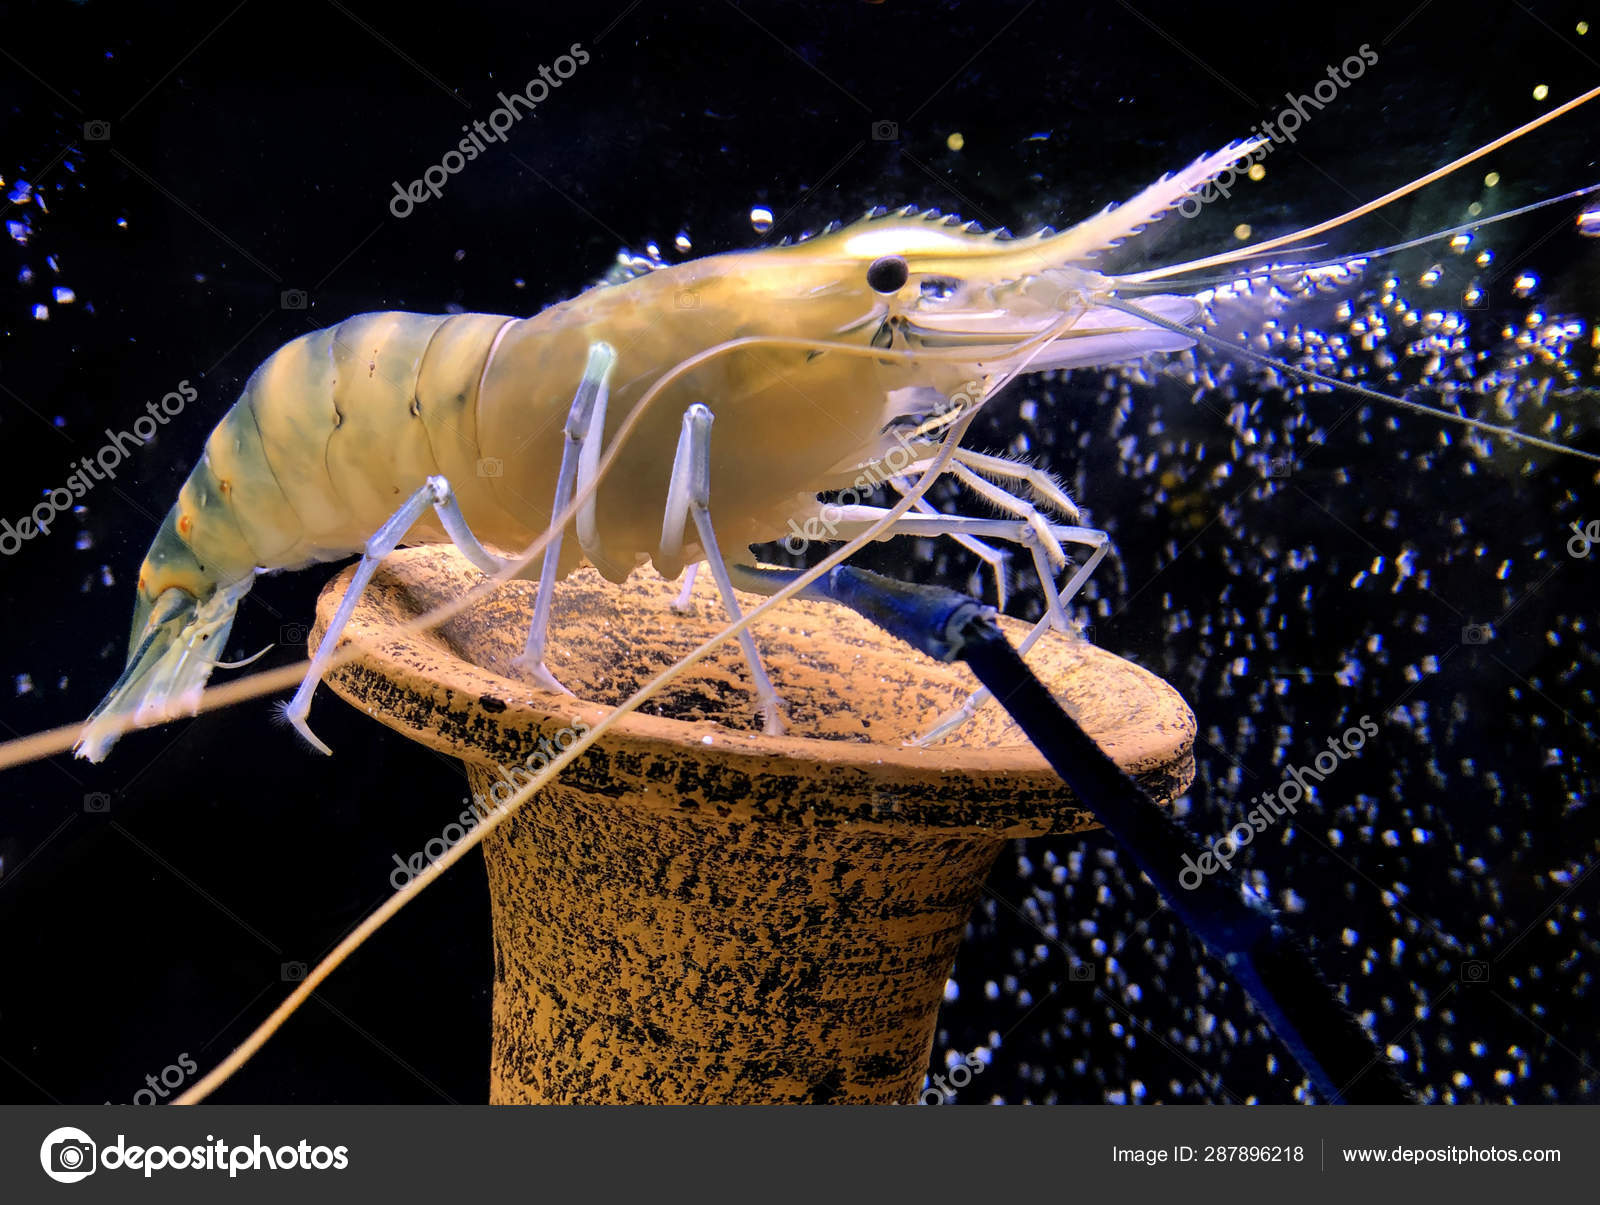 Giant freshwater prawn or giant river shrimp in tank. Stock Photo by  ©pkproject 287896218